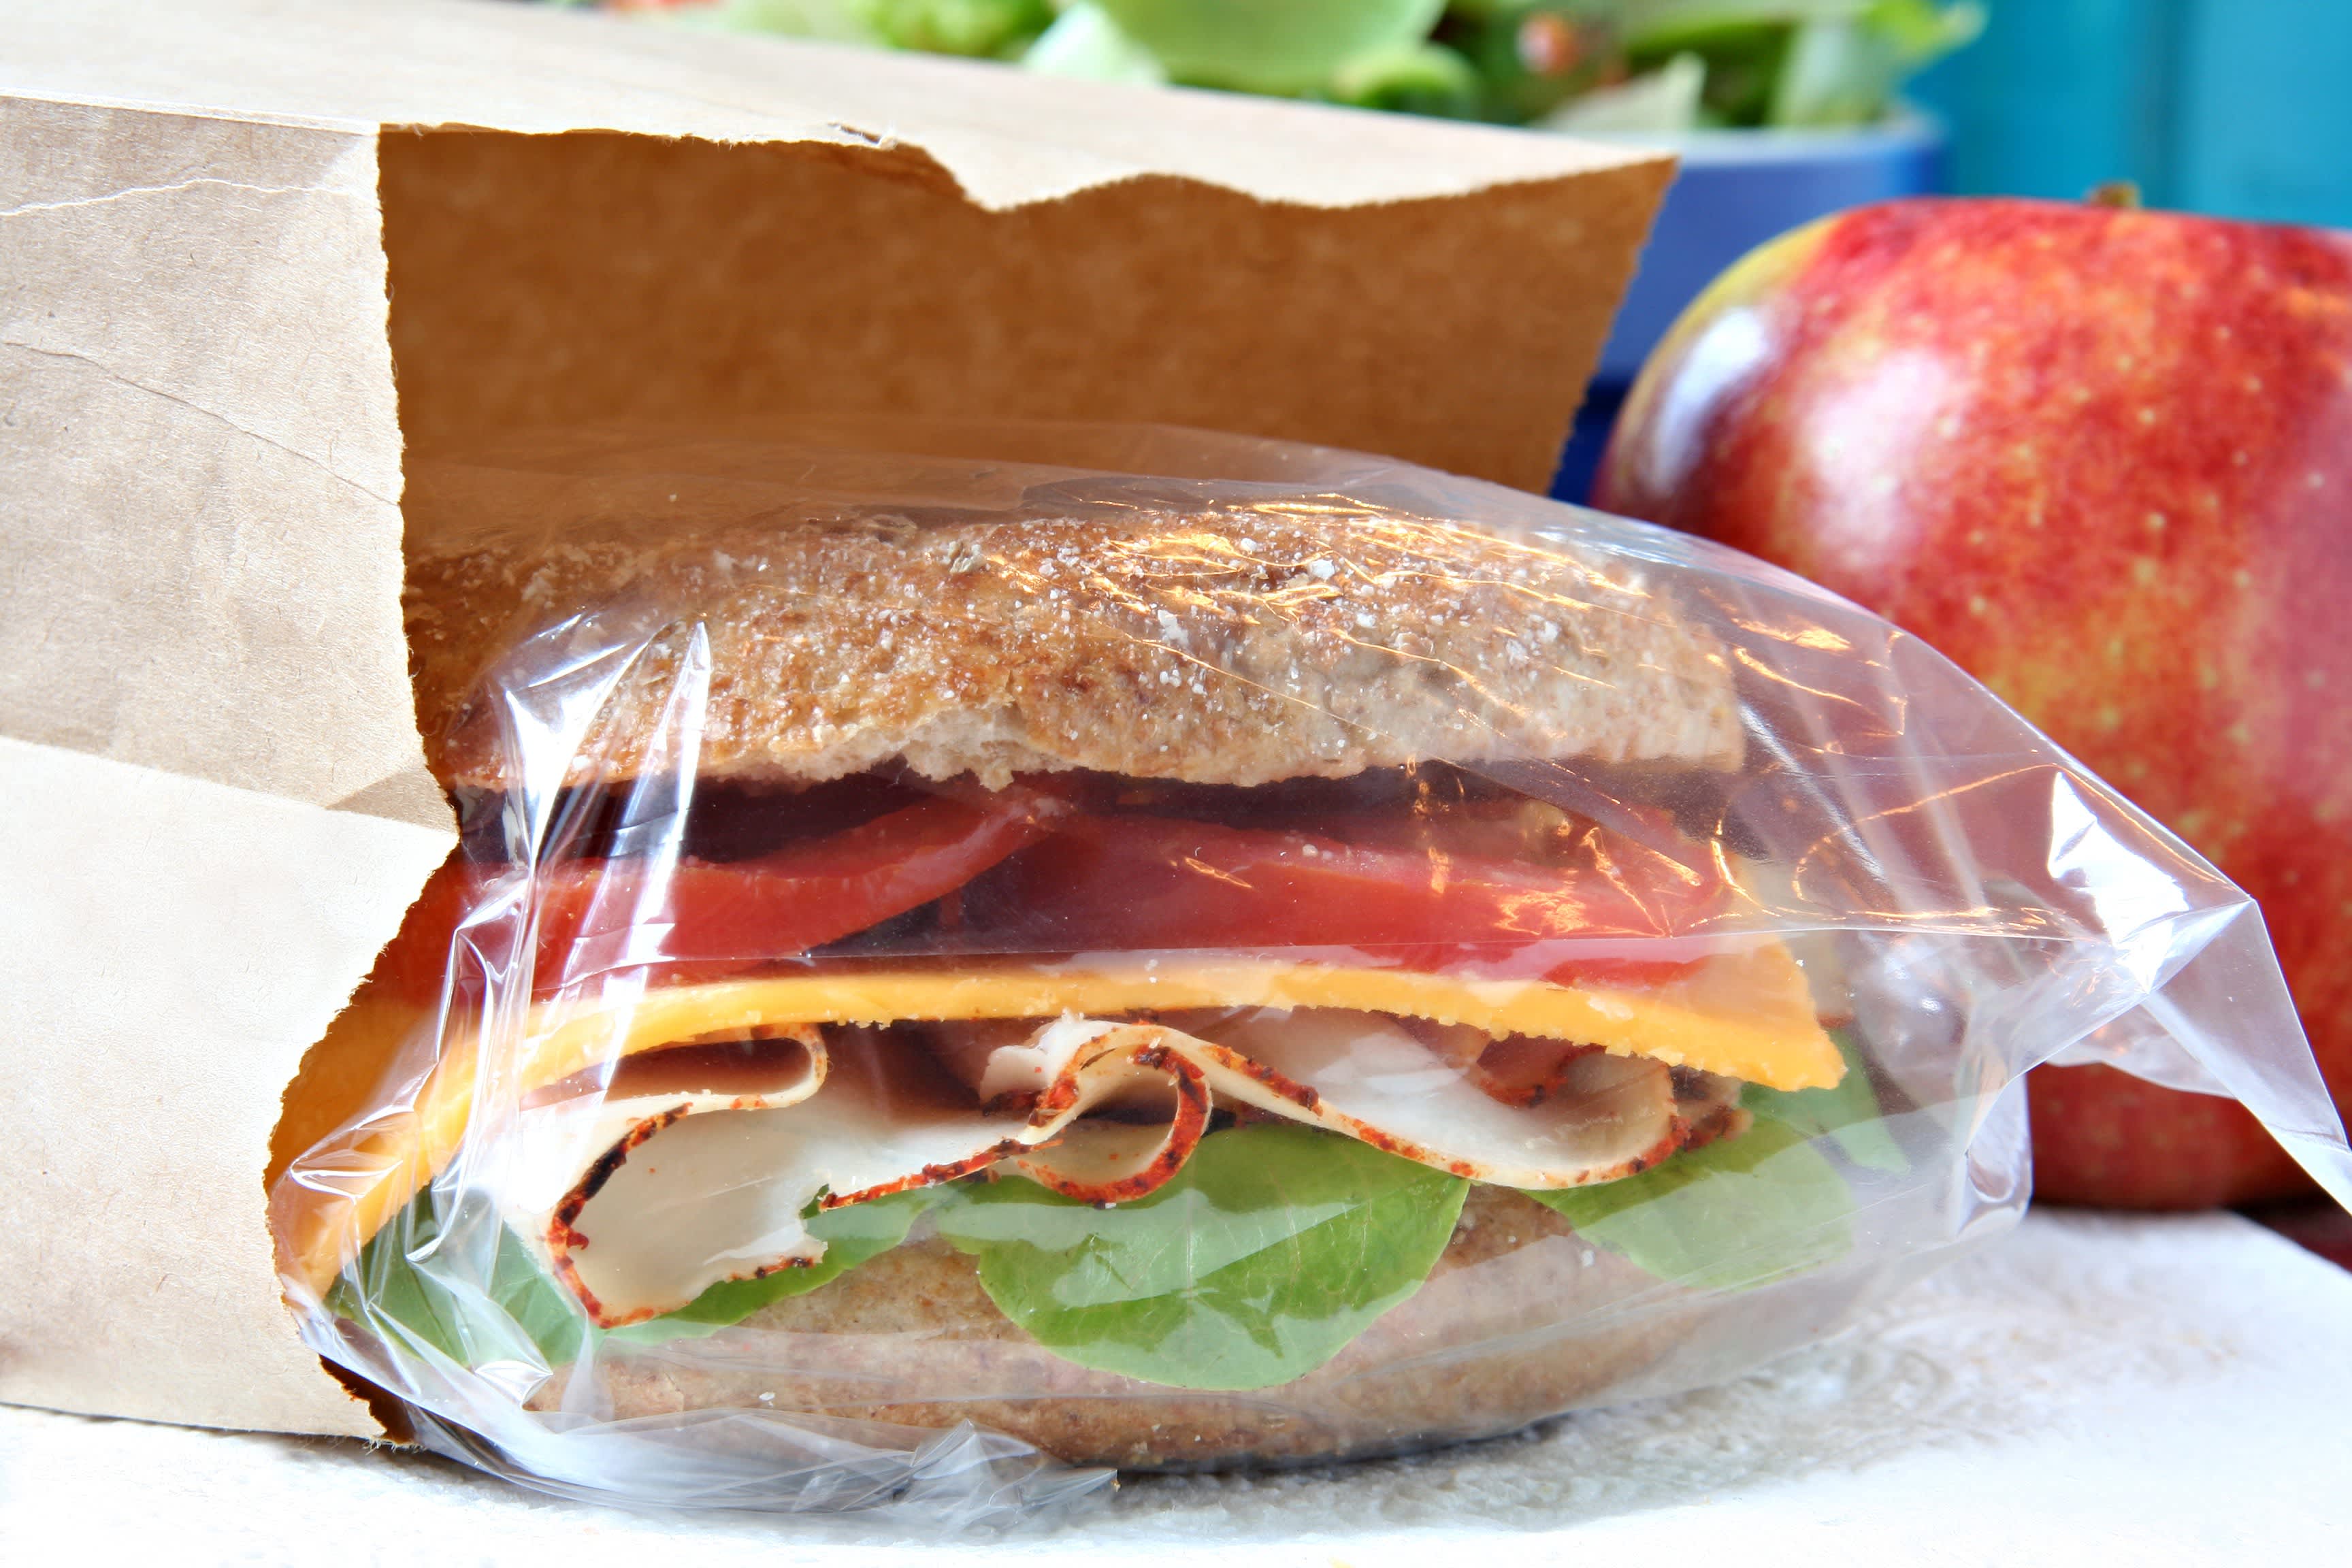 How to Pack a Sandwich and Keep it Fresh